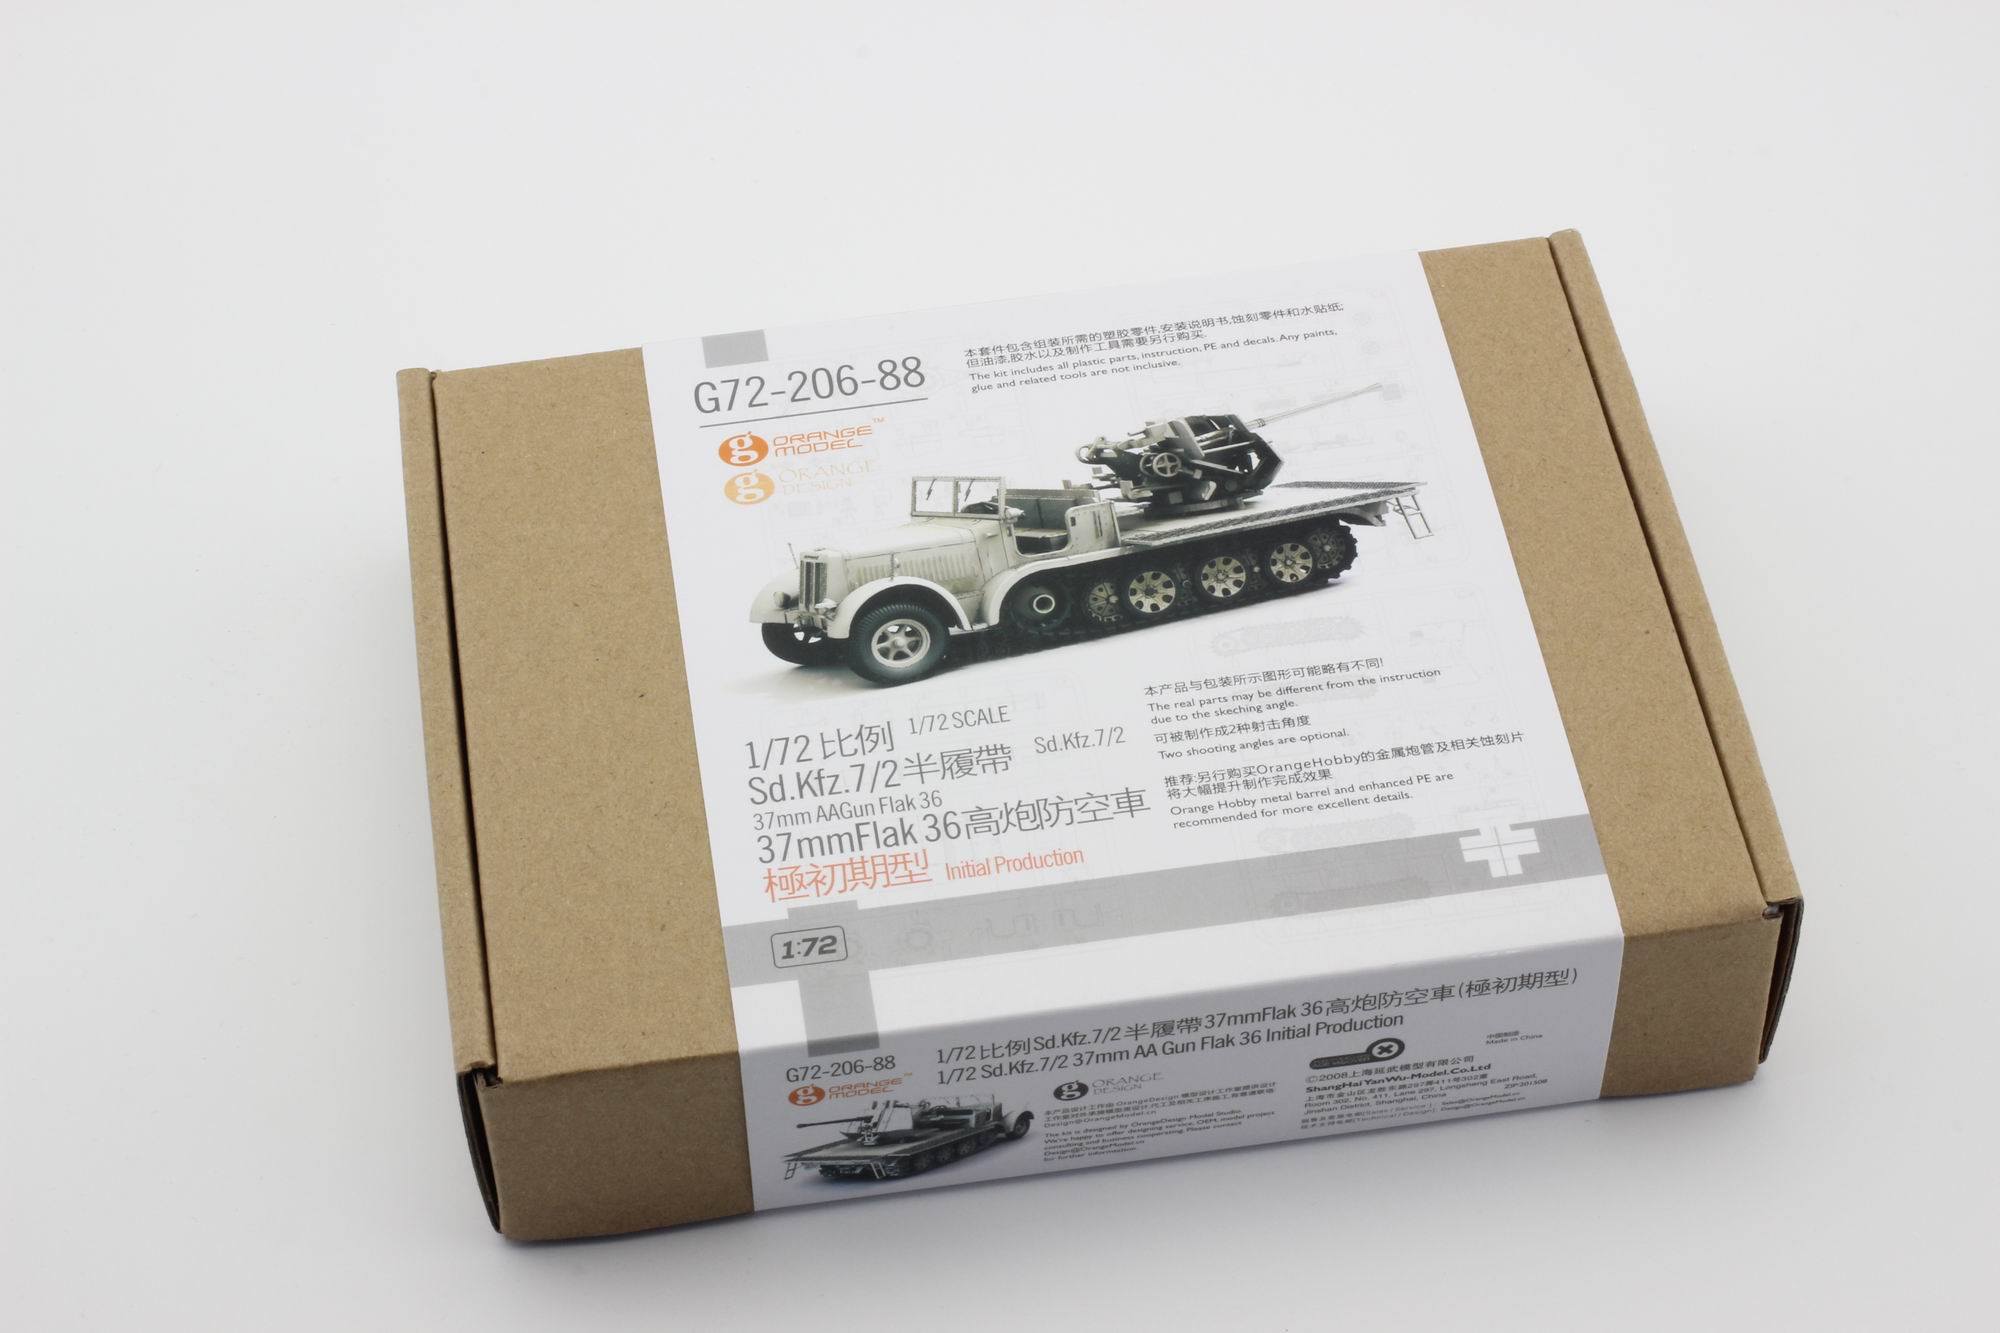 Orange Hobby 1/72 Scale Sd.kfz.7/2 37mm AAGUN Flak 36 Initial Production 2020 for sale online 